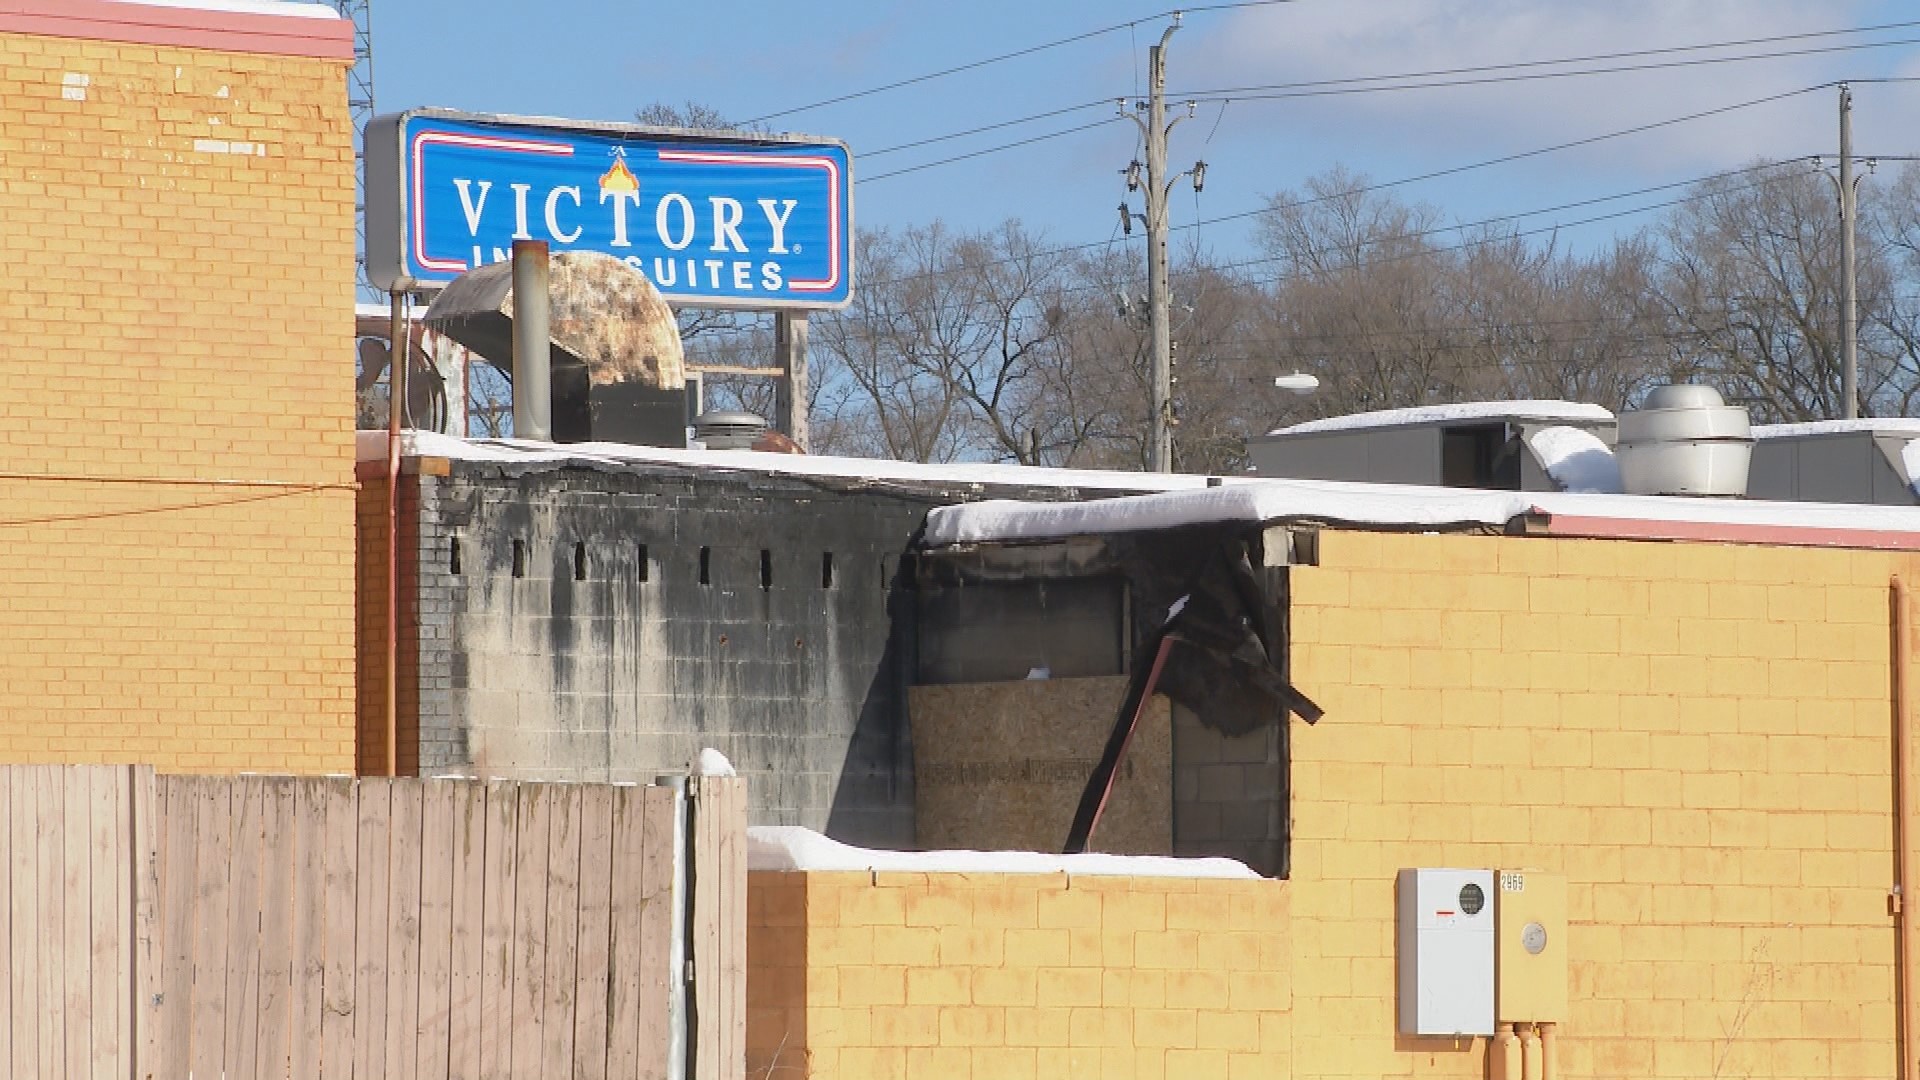 The Victory Inn & Suites has been falling apart for years and has been cited repeatedly for blight related concerns.